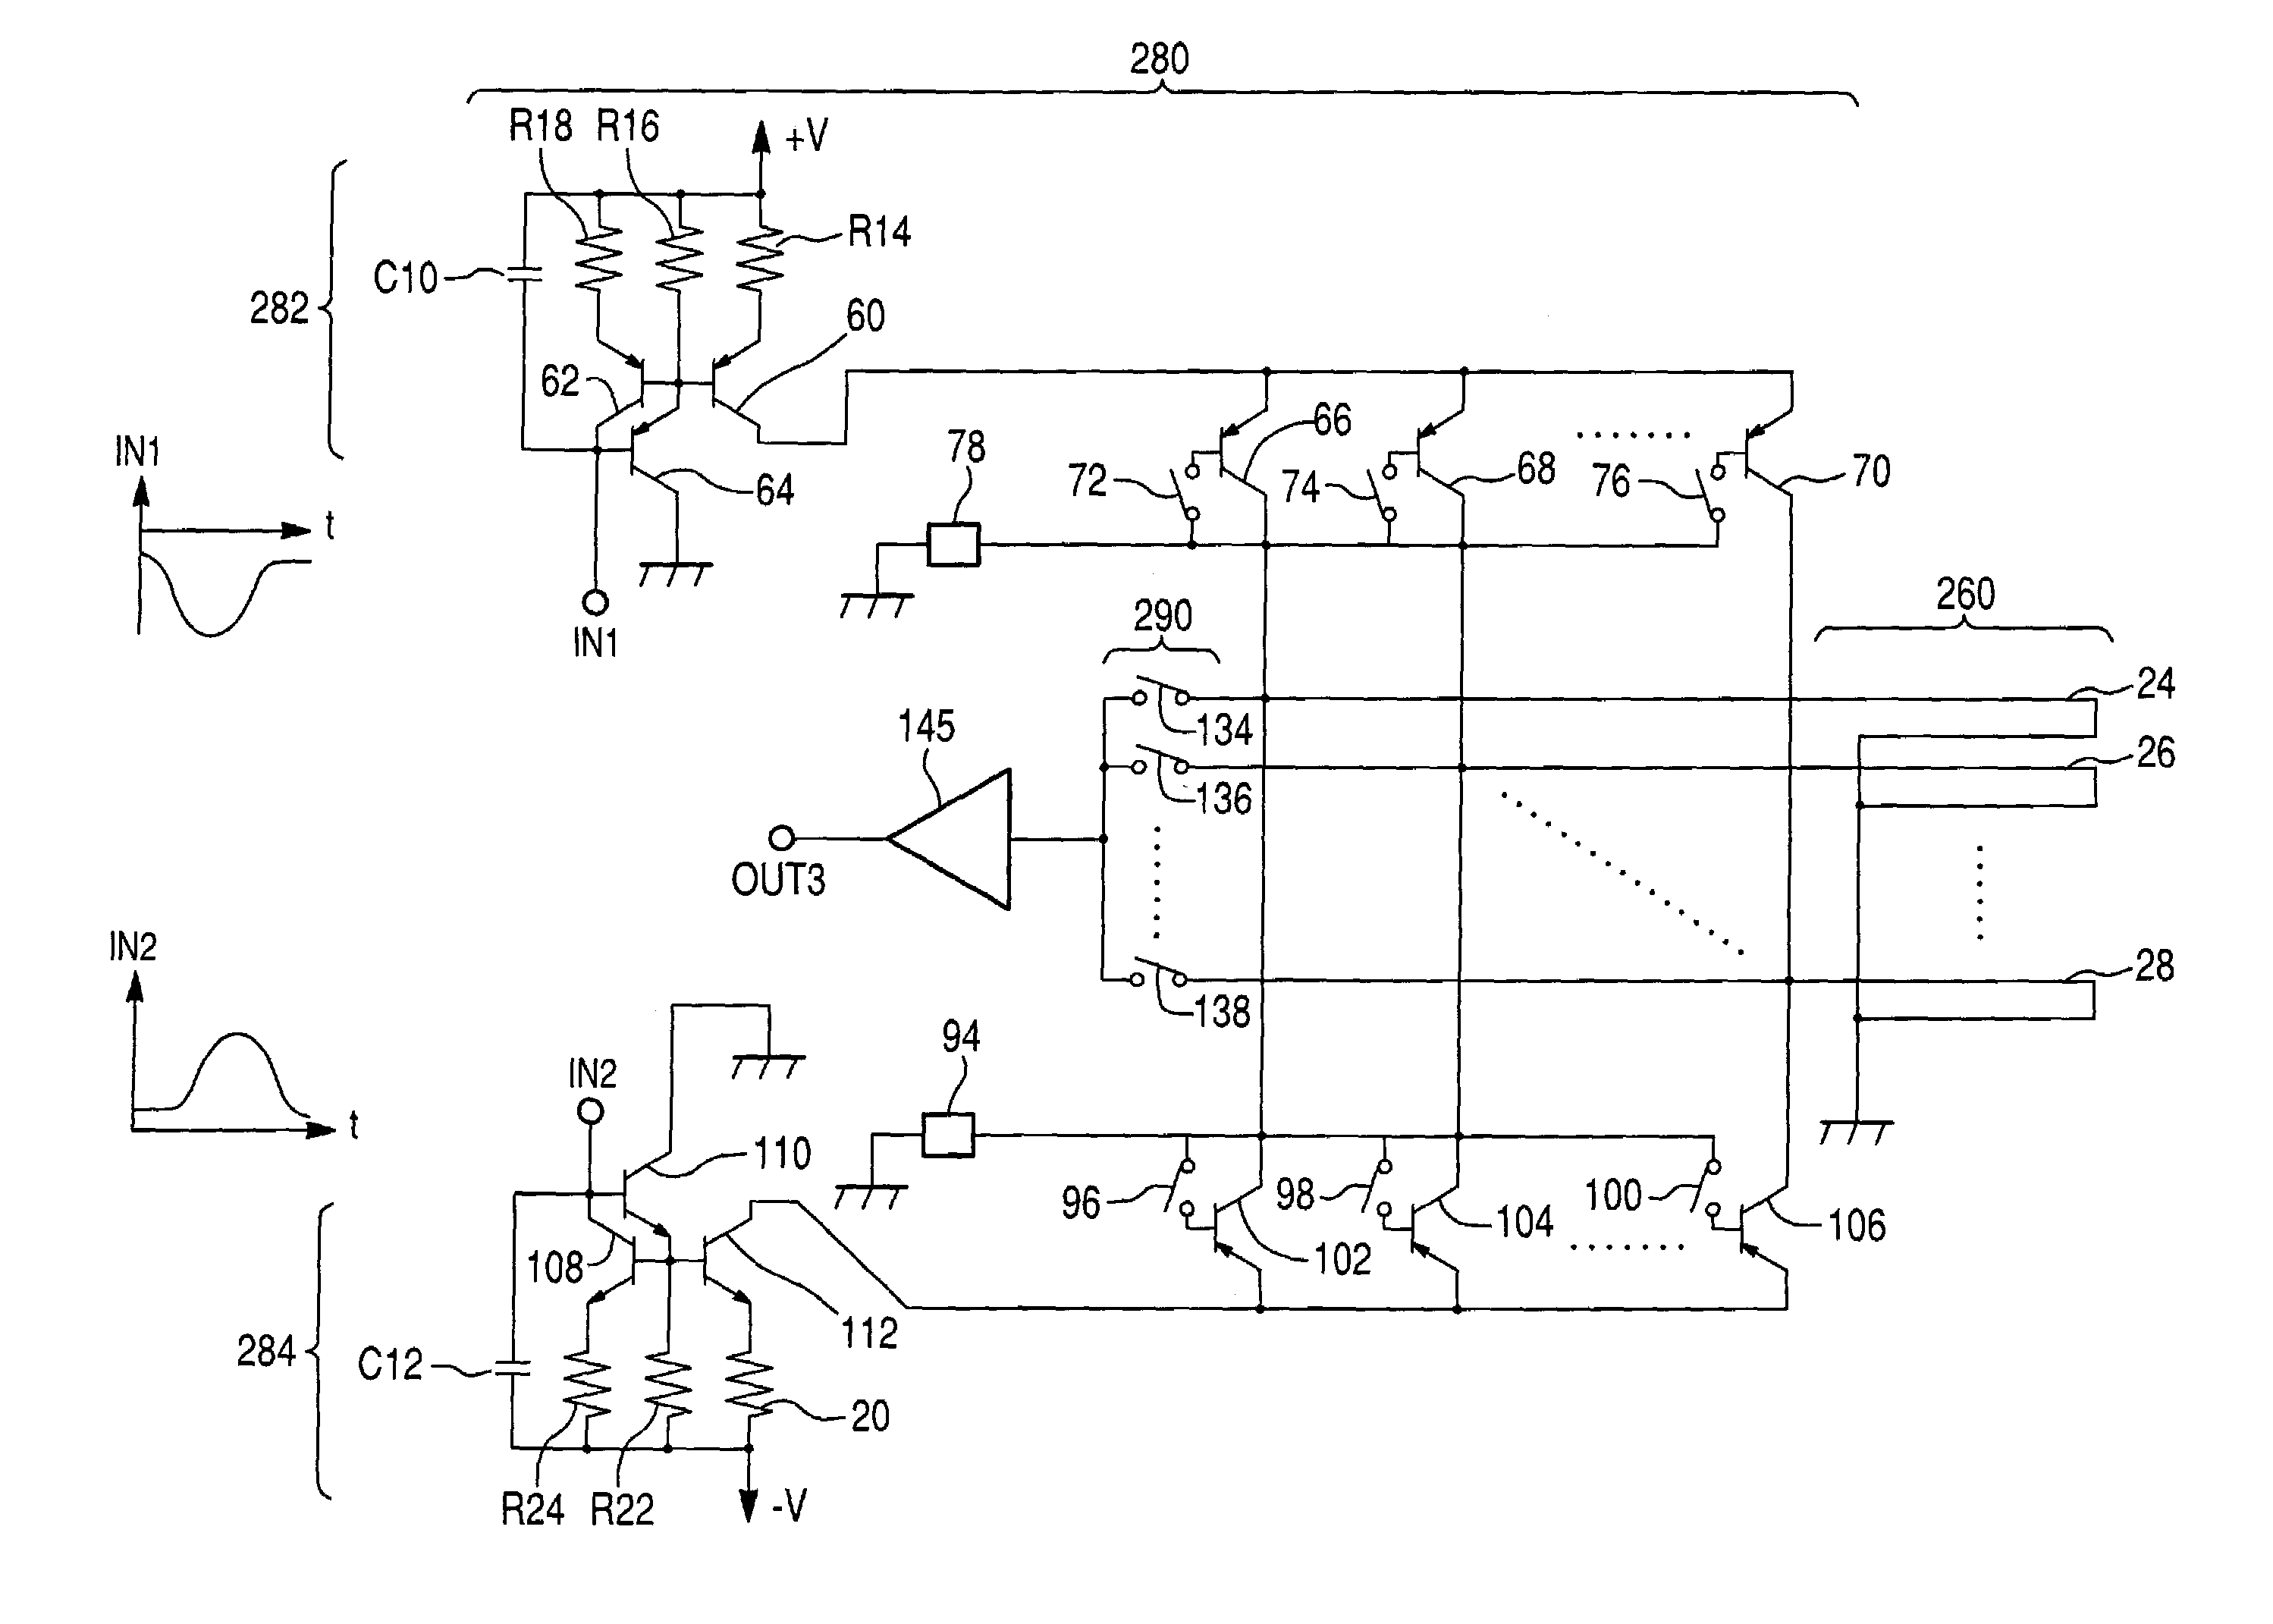 Current feed circuit for sensor coils in coordinate input device